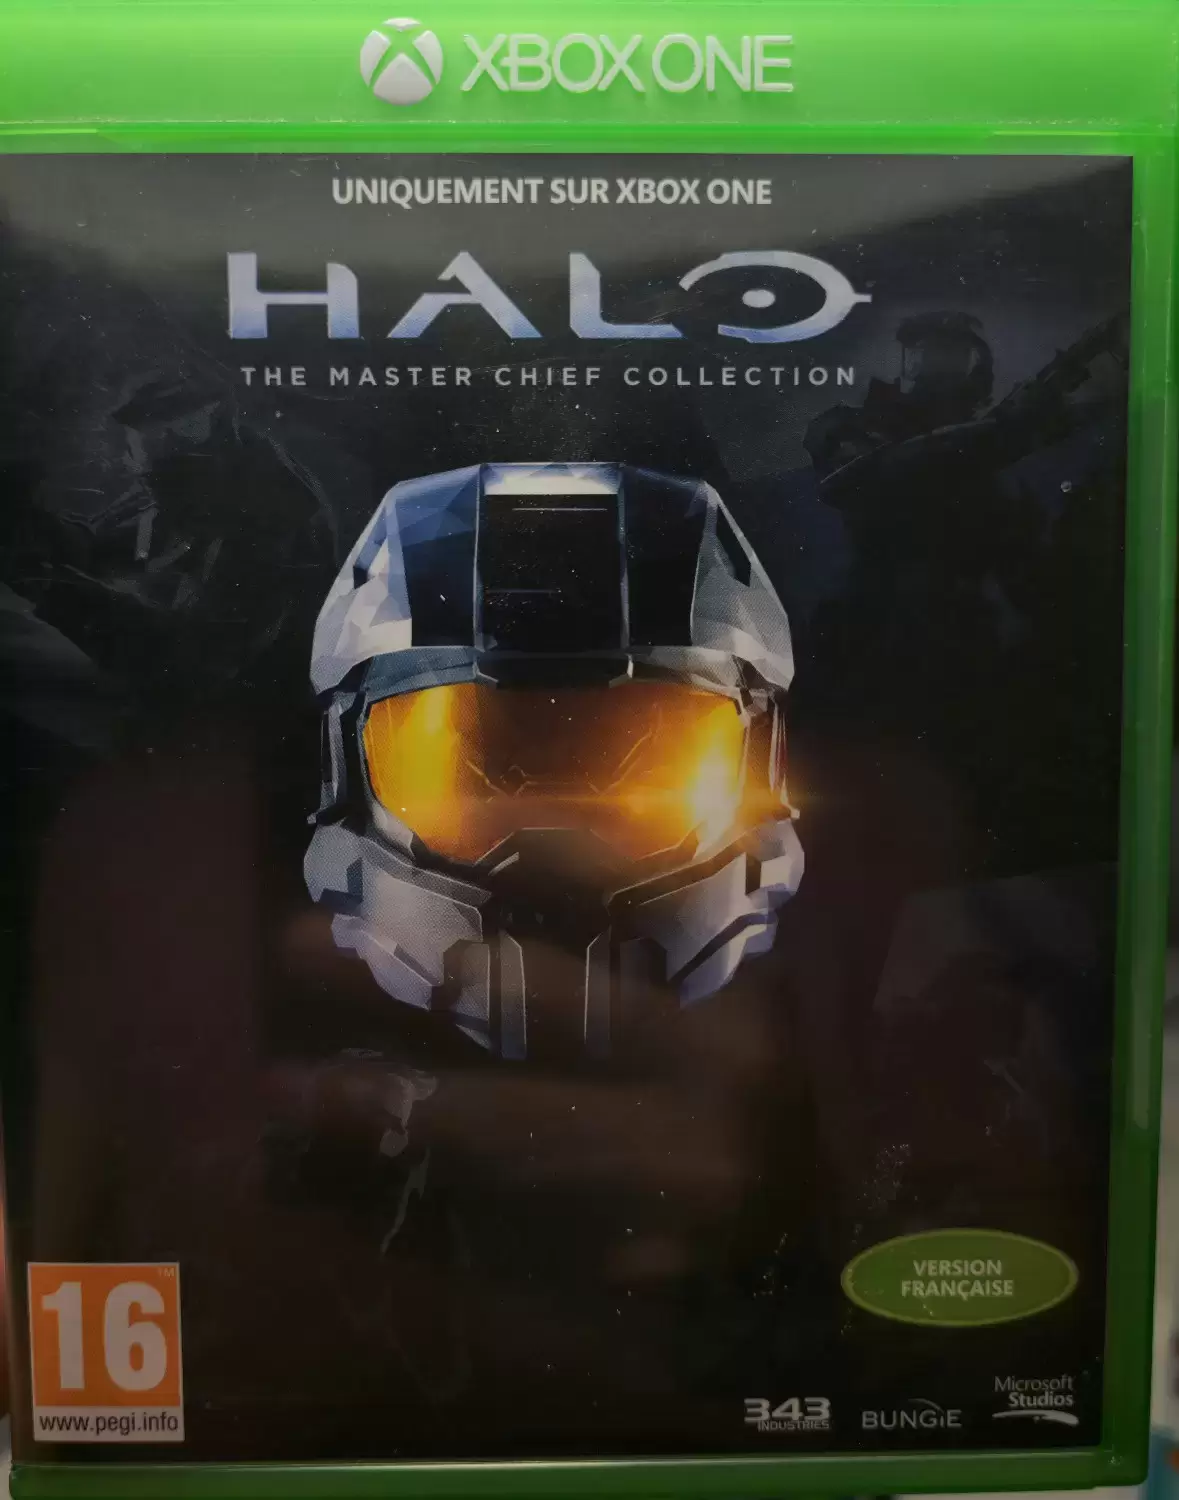 Jeux XBOX One - Halo - The master chief collection